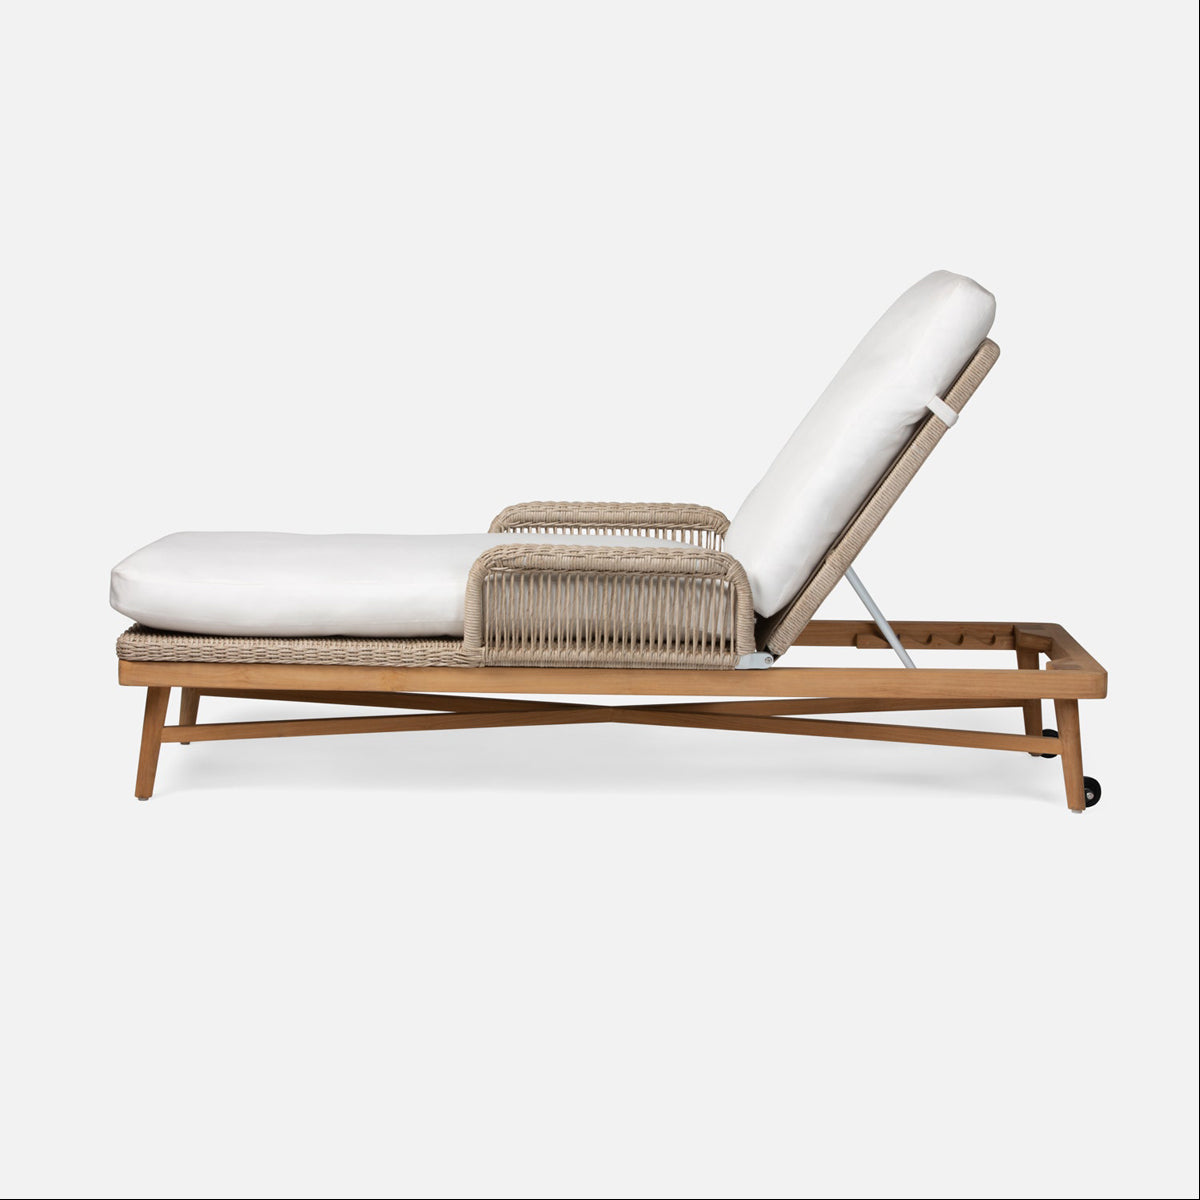 Made Goods Hendrick Teak Outdoor Chaise Lounge in Pagua Fabric